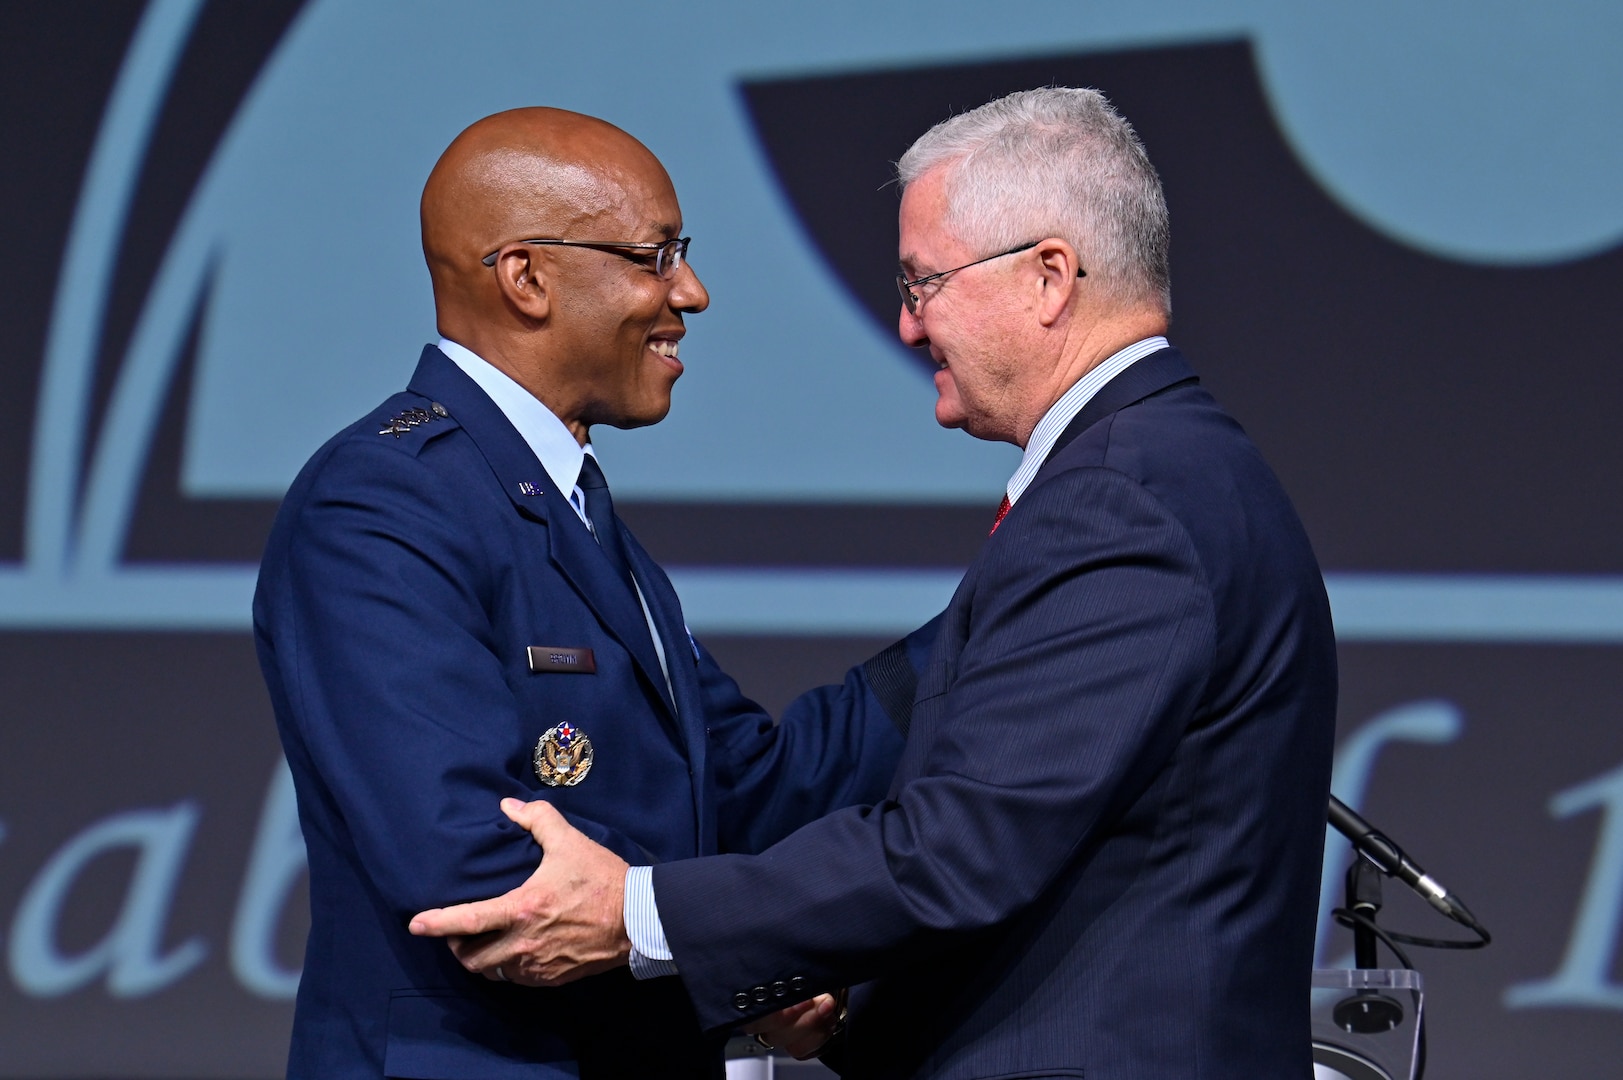 Air Force Chief of Staff Gen. CQ Brown, Jr. greets Gerald Murray, Air and Space Forces Association chairman of the board, after Brown delivered a keynote address on the state of the Air Force during the 2022 Air and Space Forces Association’s Air, Space and Cyber Conference in National Harbor, Md., Sept. 19, 2022. (U.S. Air Force photo by Eric Dietrich)